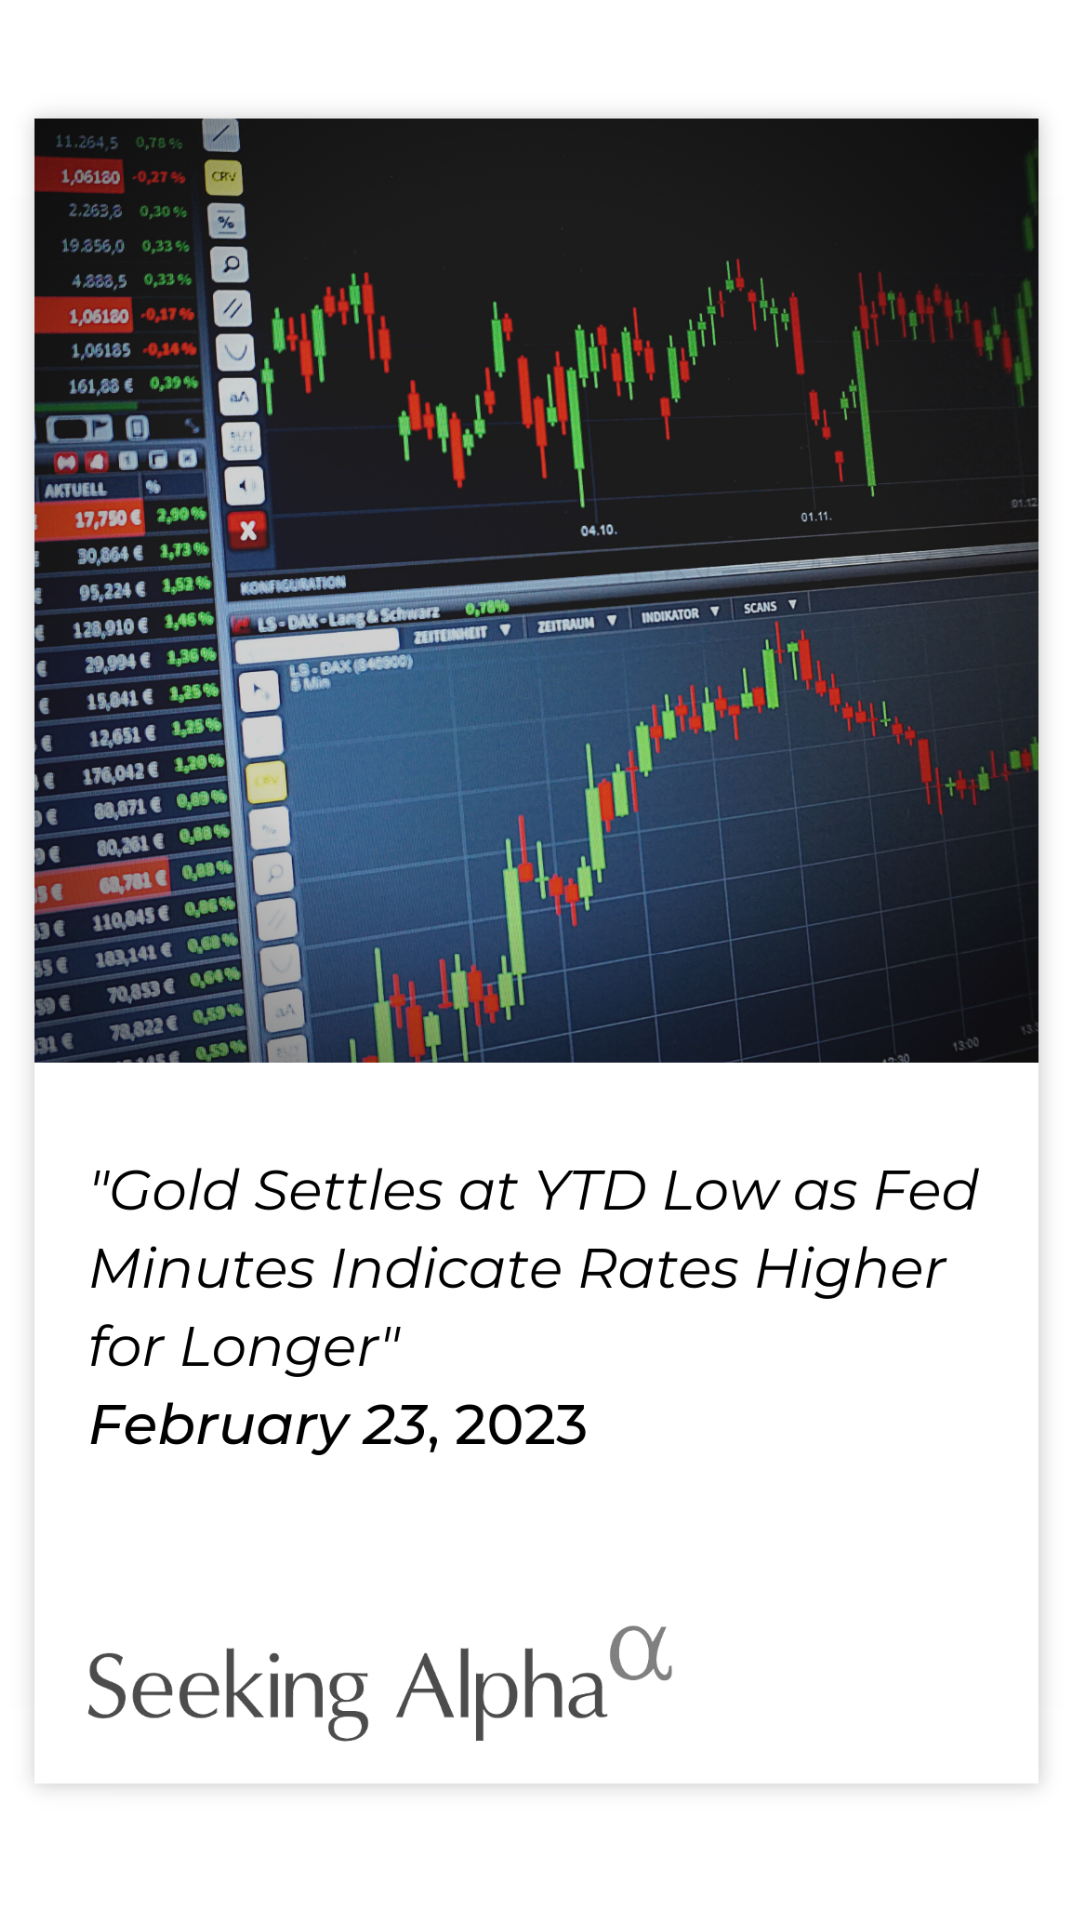 Gold settles at YTD low as Fed minutes indicate rates higher for longer